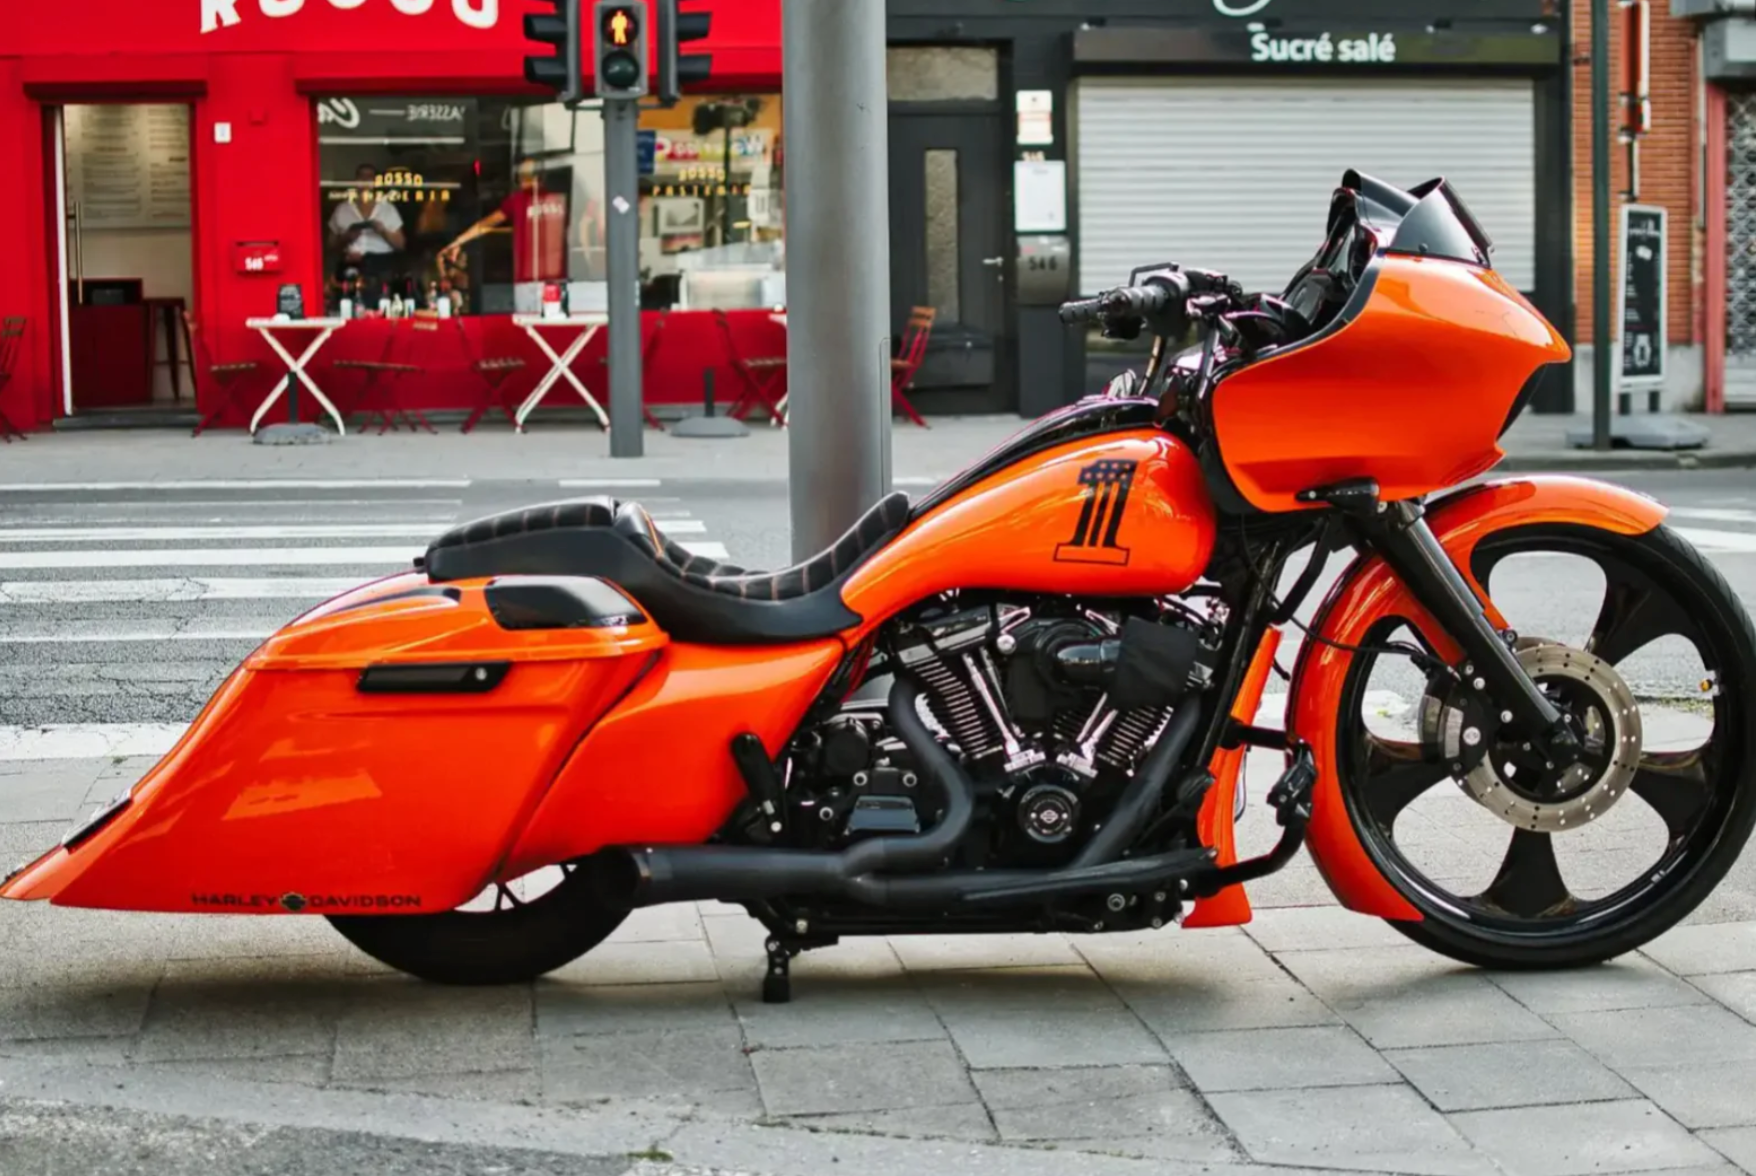 Do you know the "TRUE" Bagger Style?